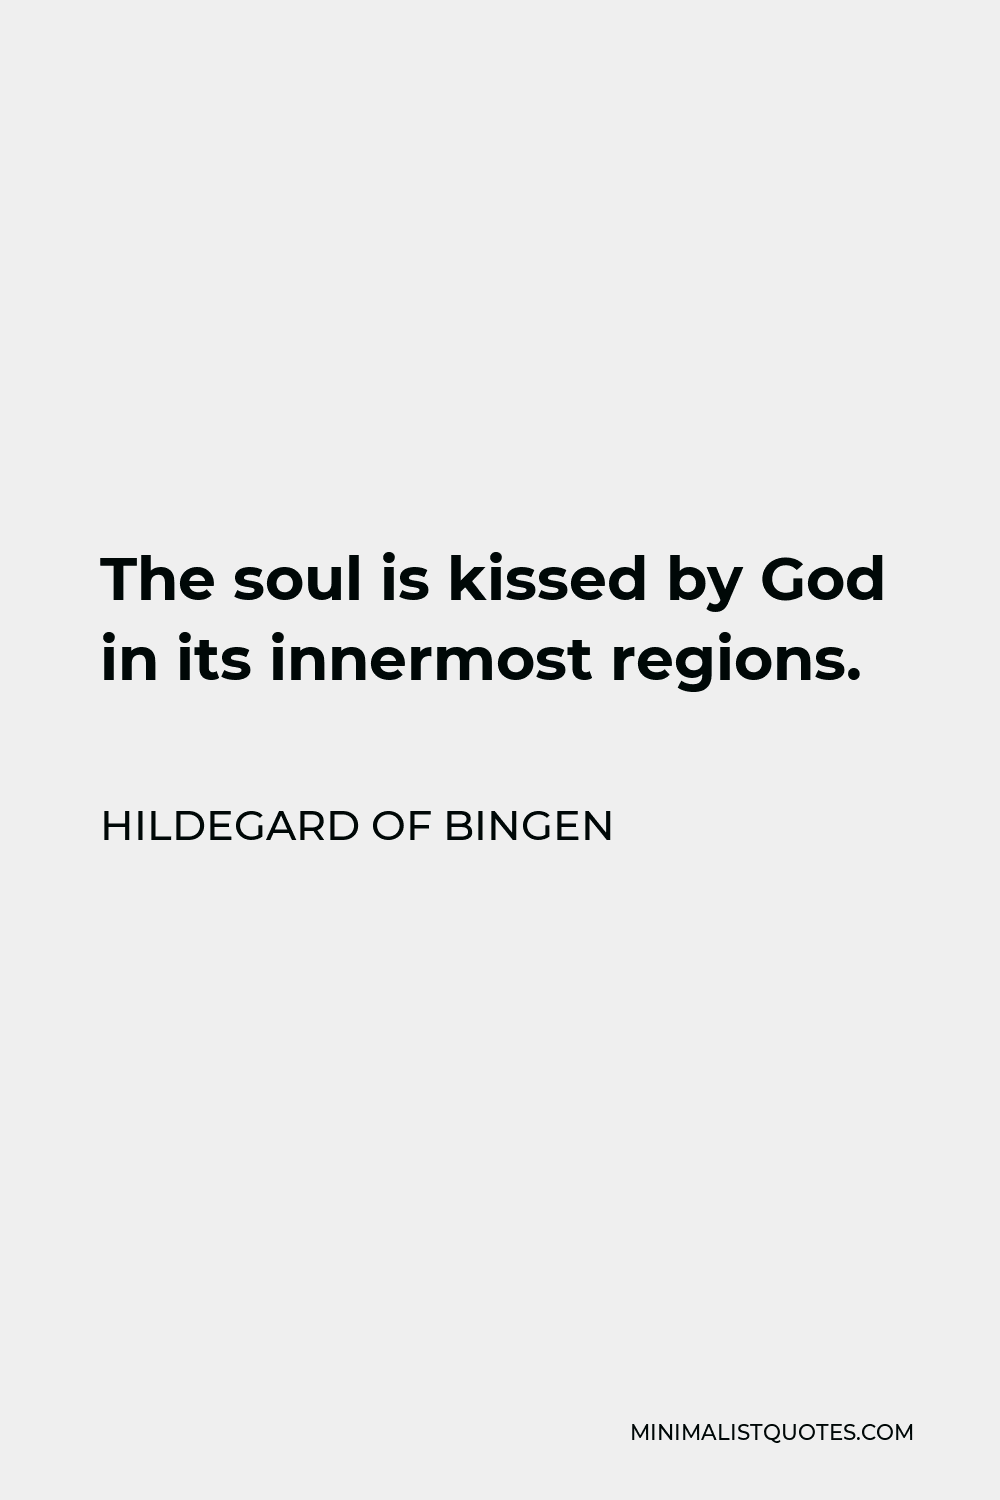 Hildegard of Bingen Quote - The soul is kissed by God in its innermost regions. With interior yearning, grace and blessing are bestowed. It is a yearning to take on God’s gentle yoke, It is a yearning to give one’s self to God’s Way.